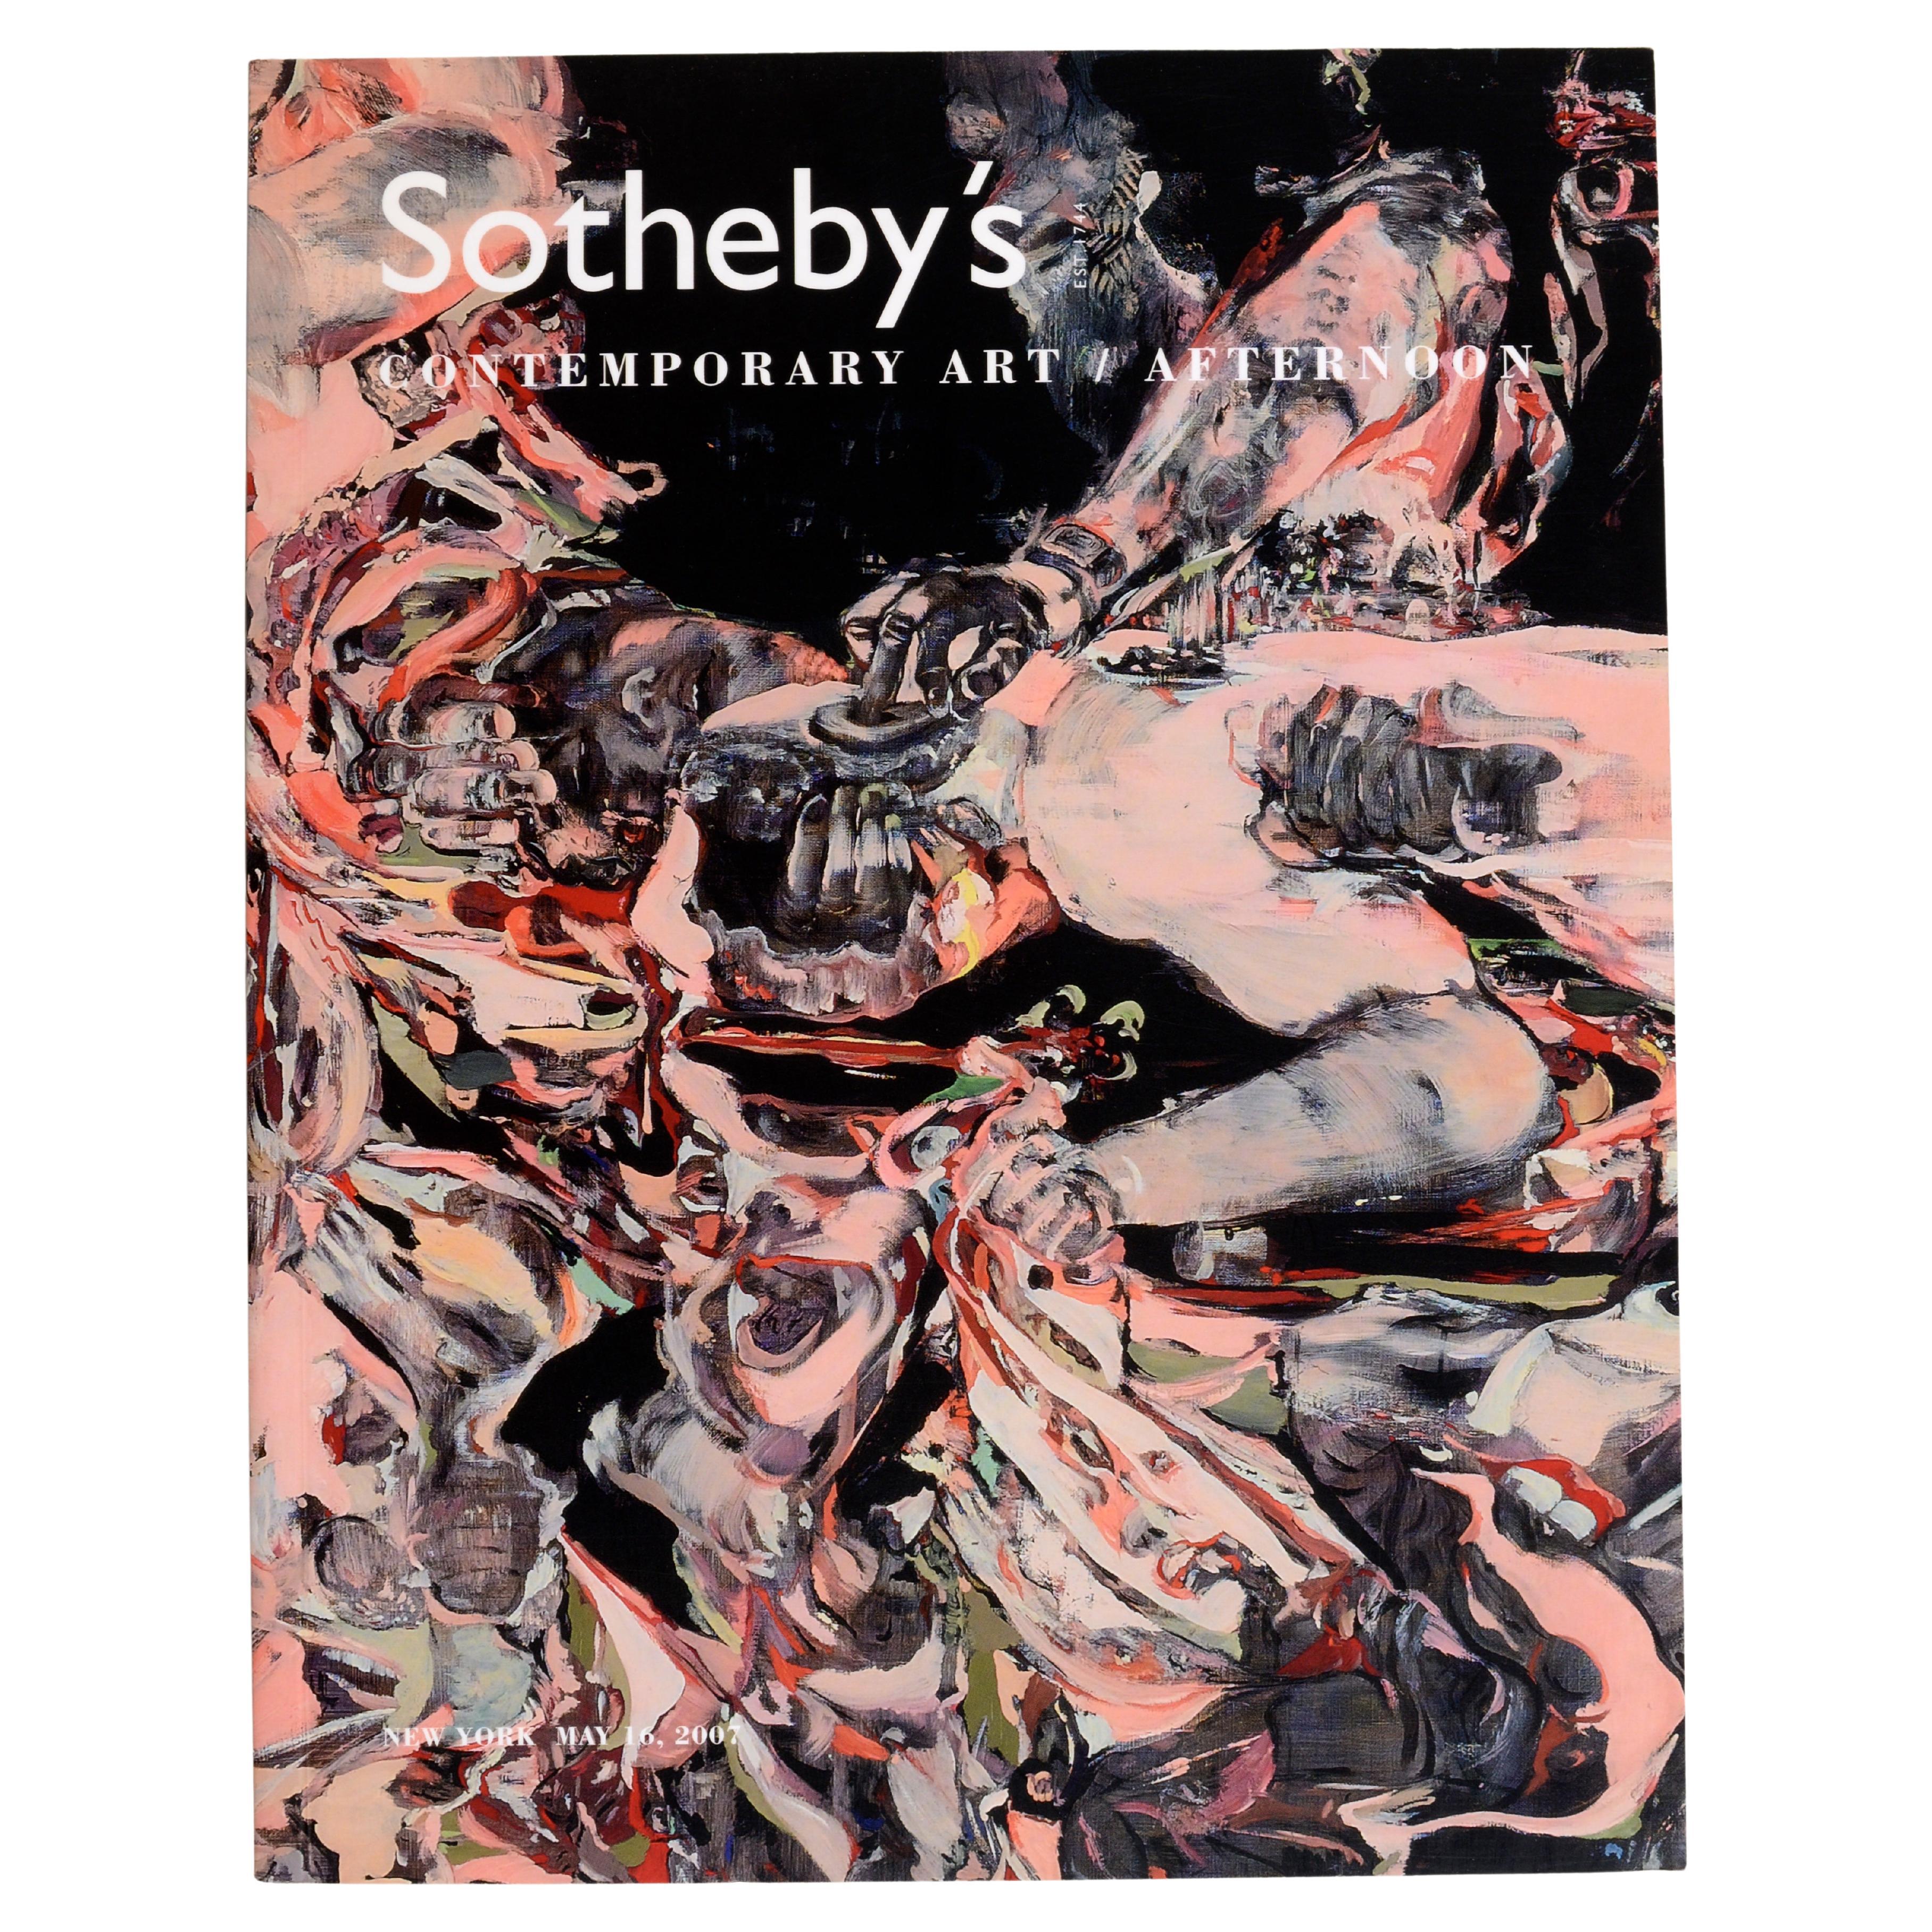 Contemporary Art Afternoon May 16, 2007 Sotheby's, 1st Ed